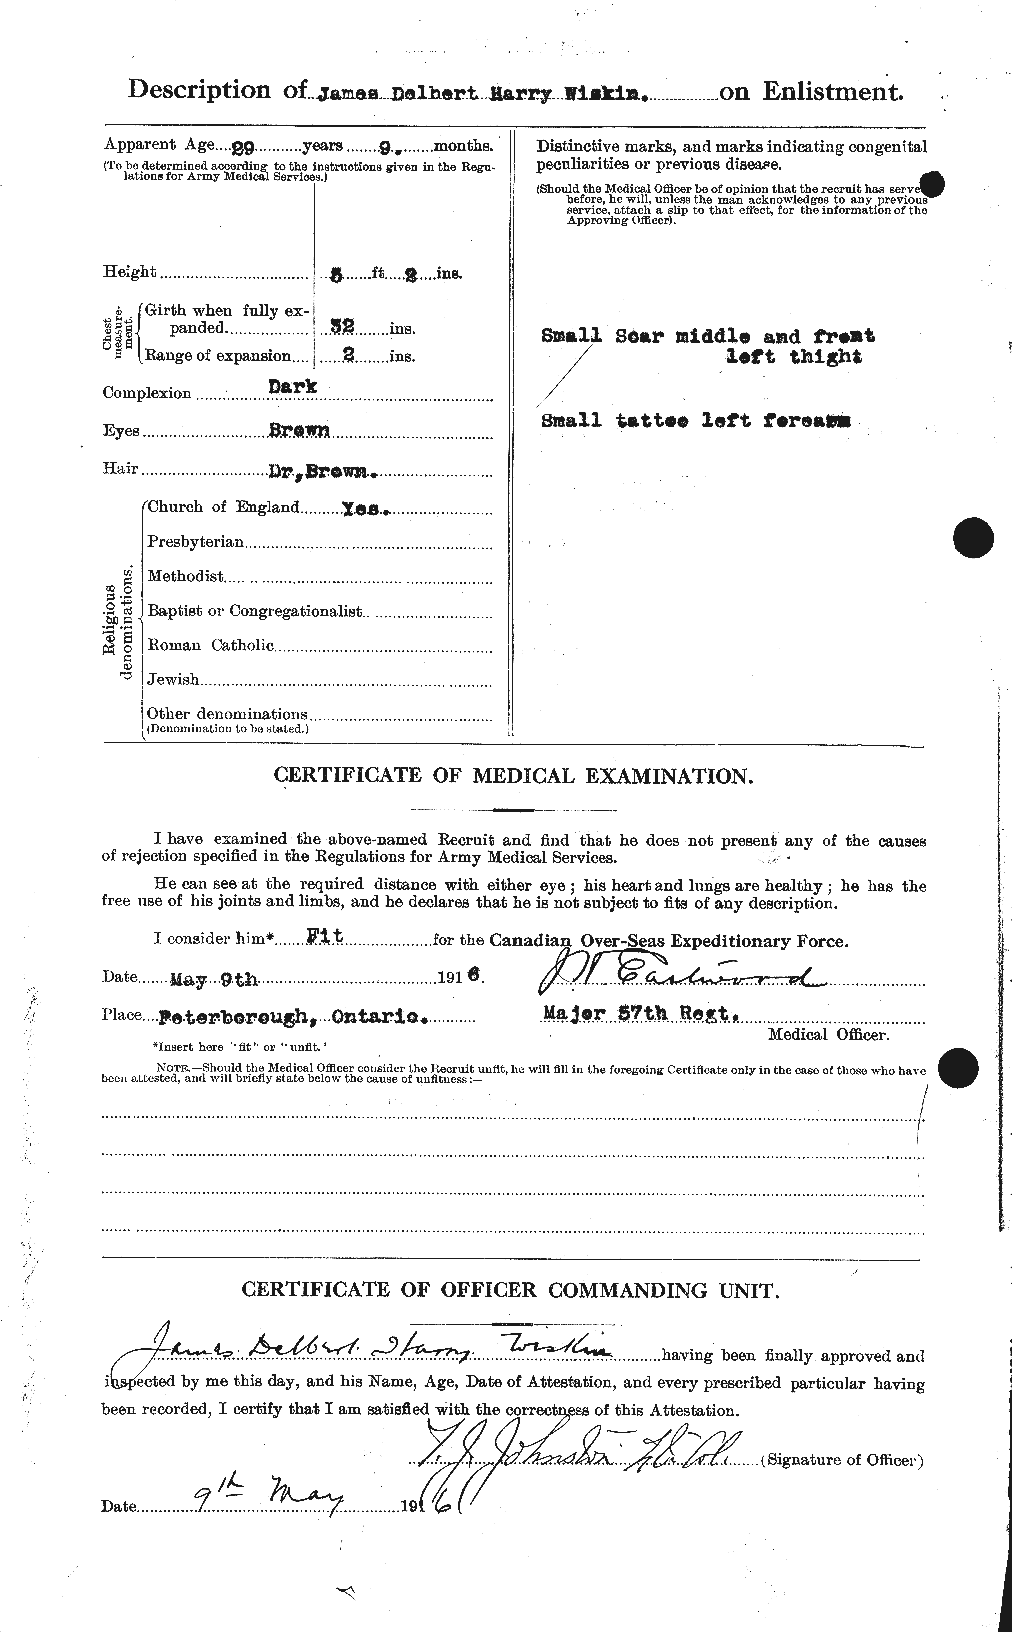 Personnel Records of the First World War - CEF 679812b